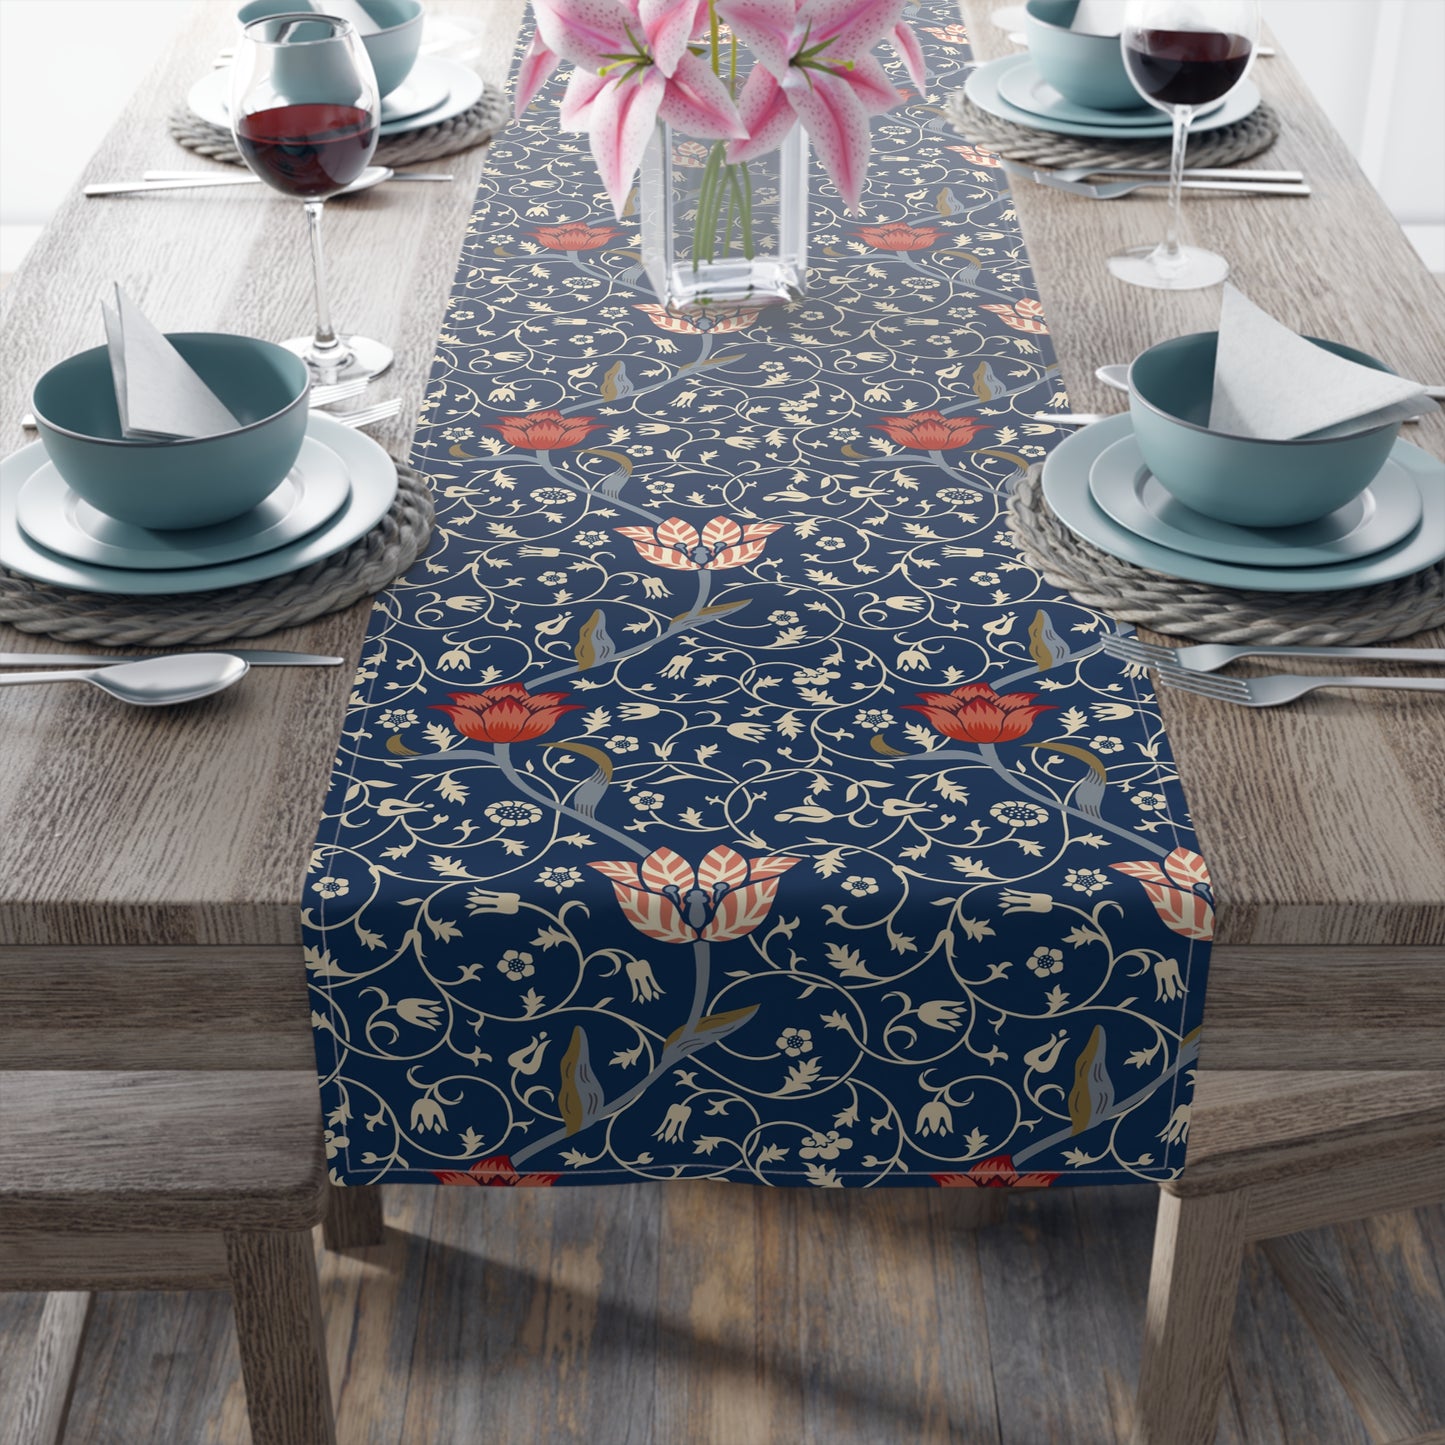 william-morris-co-table-runner-medway-collection-7